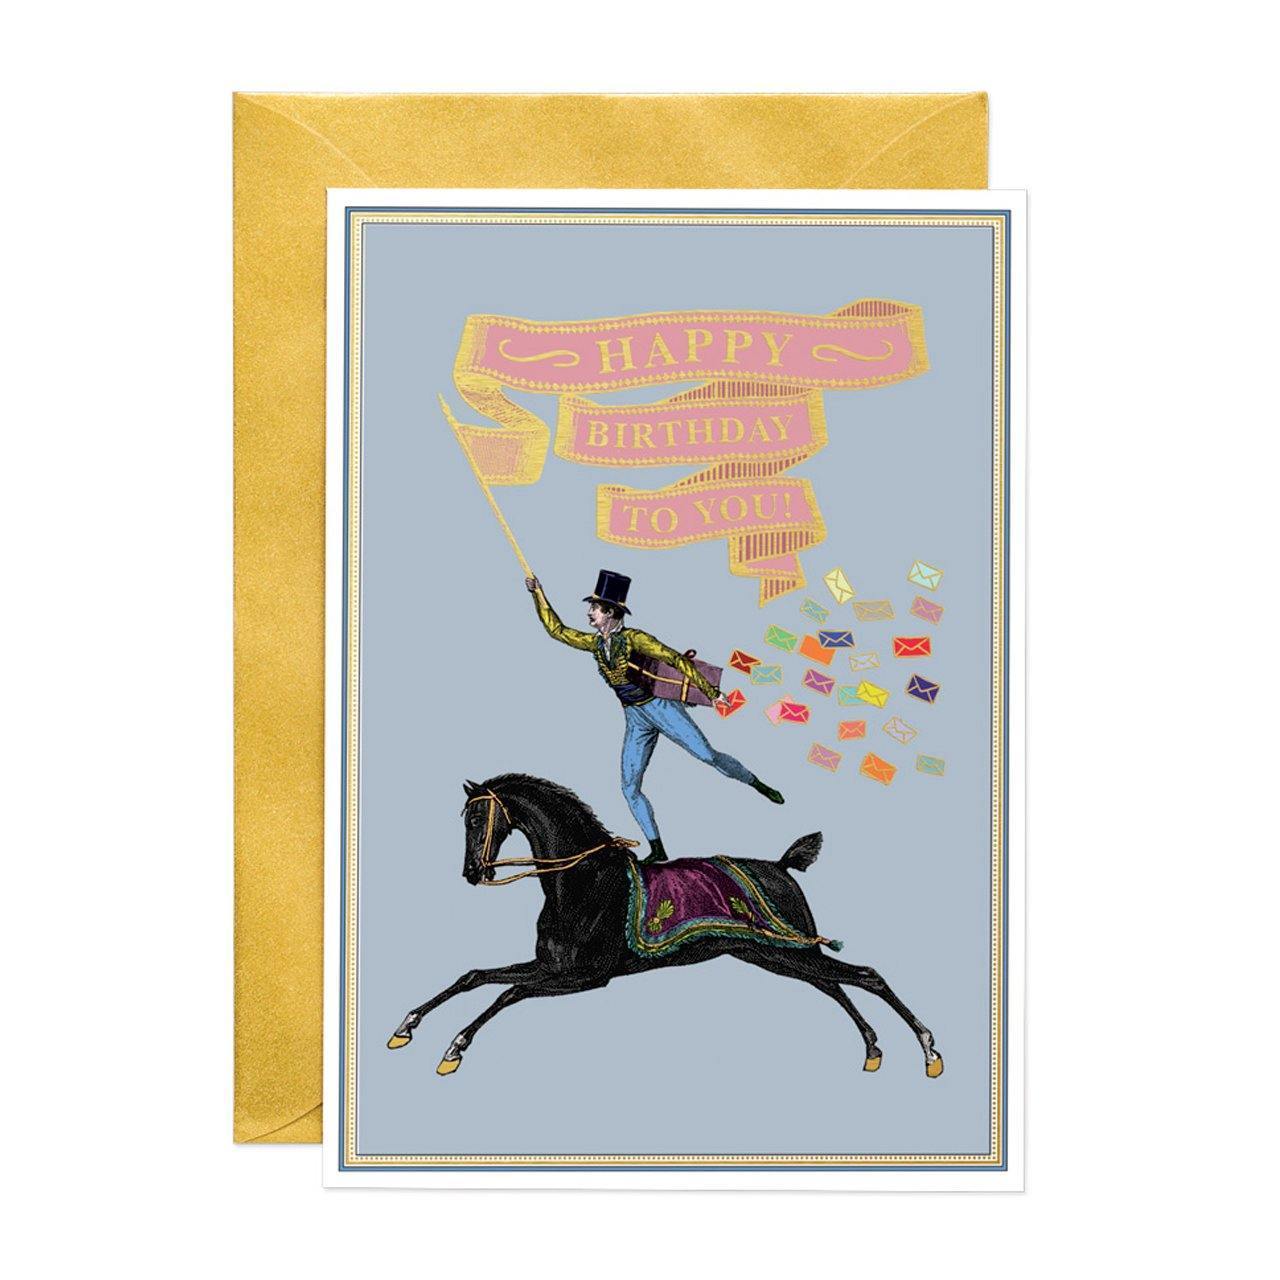 Happy Birthday Rider (LARGE) Greeting Card - Chase and Wonder - Proudly Made in Britain